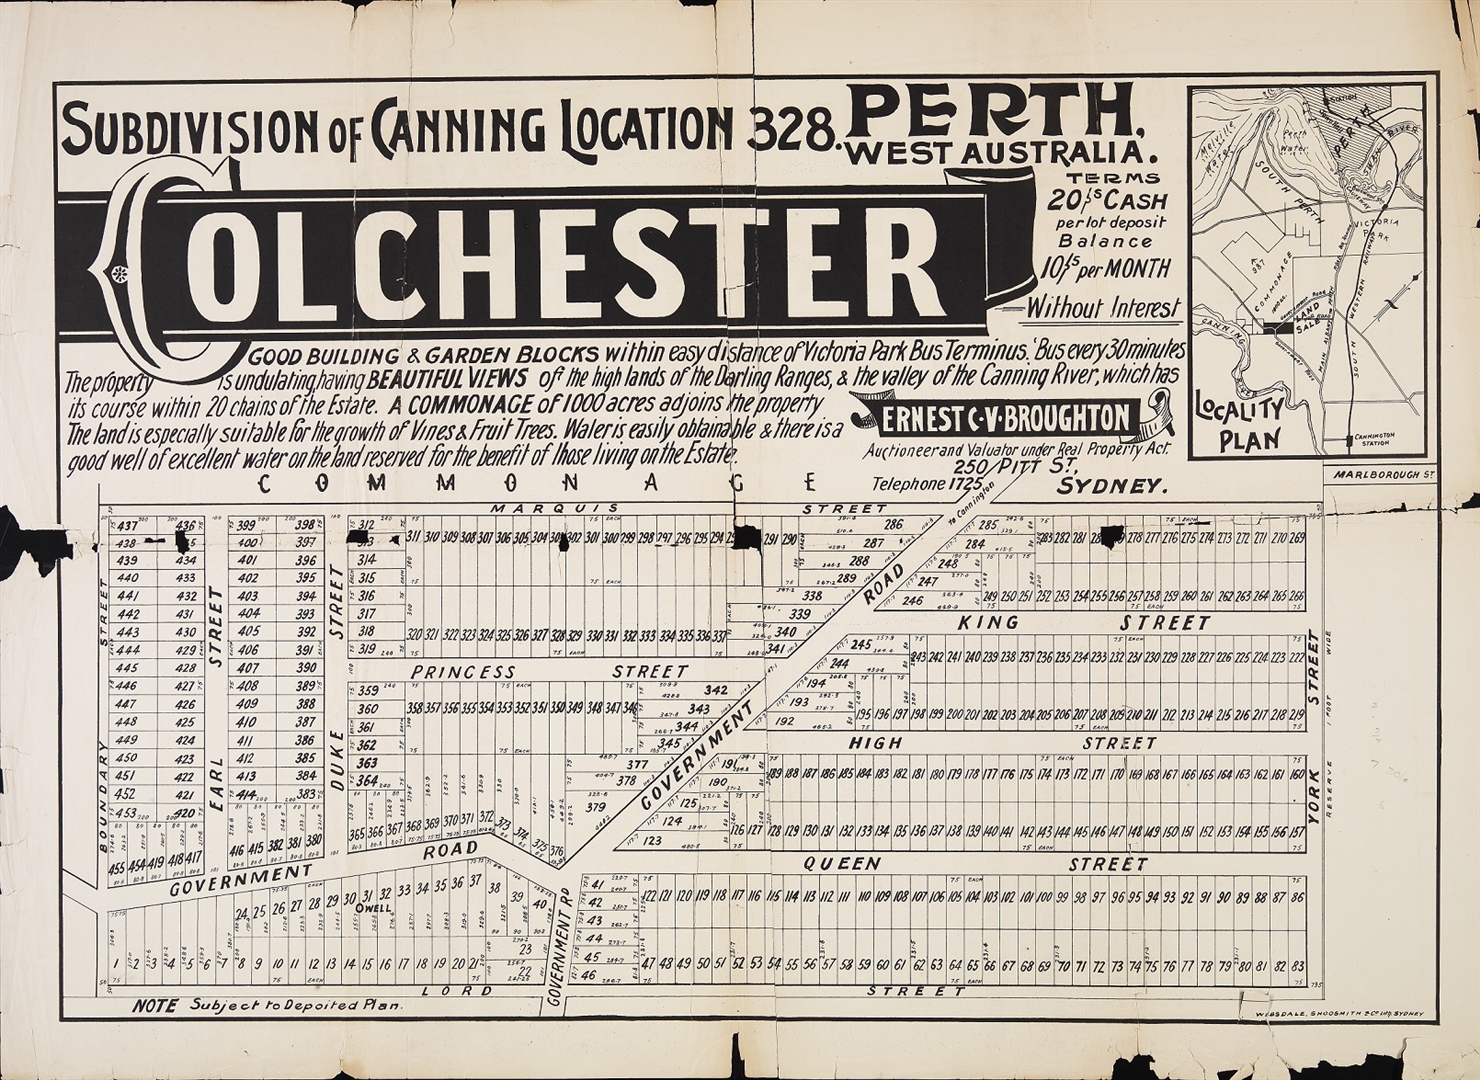 Colchester : subdivision of Canning Location 328 [1899?] Image